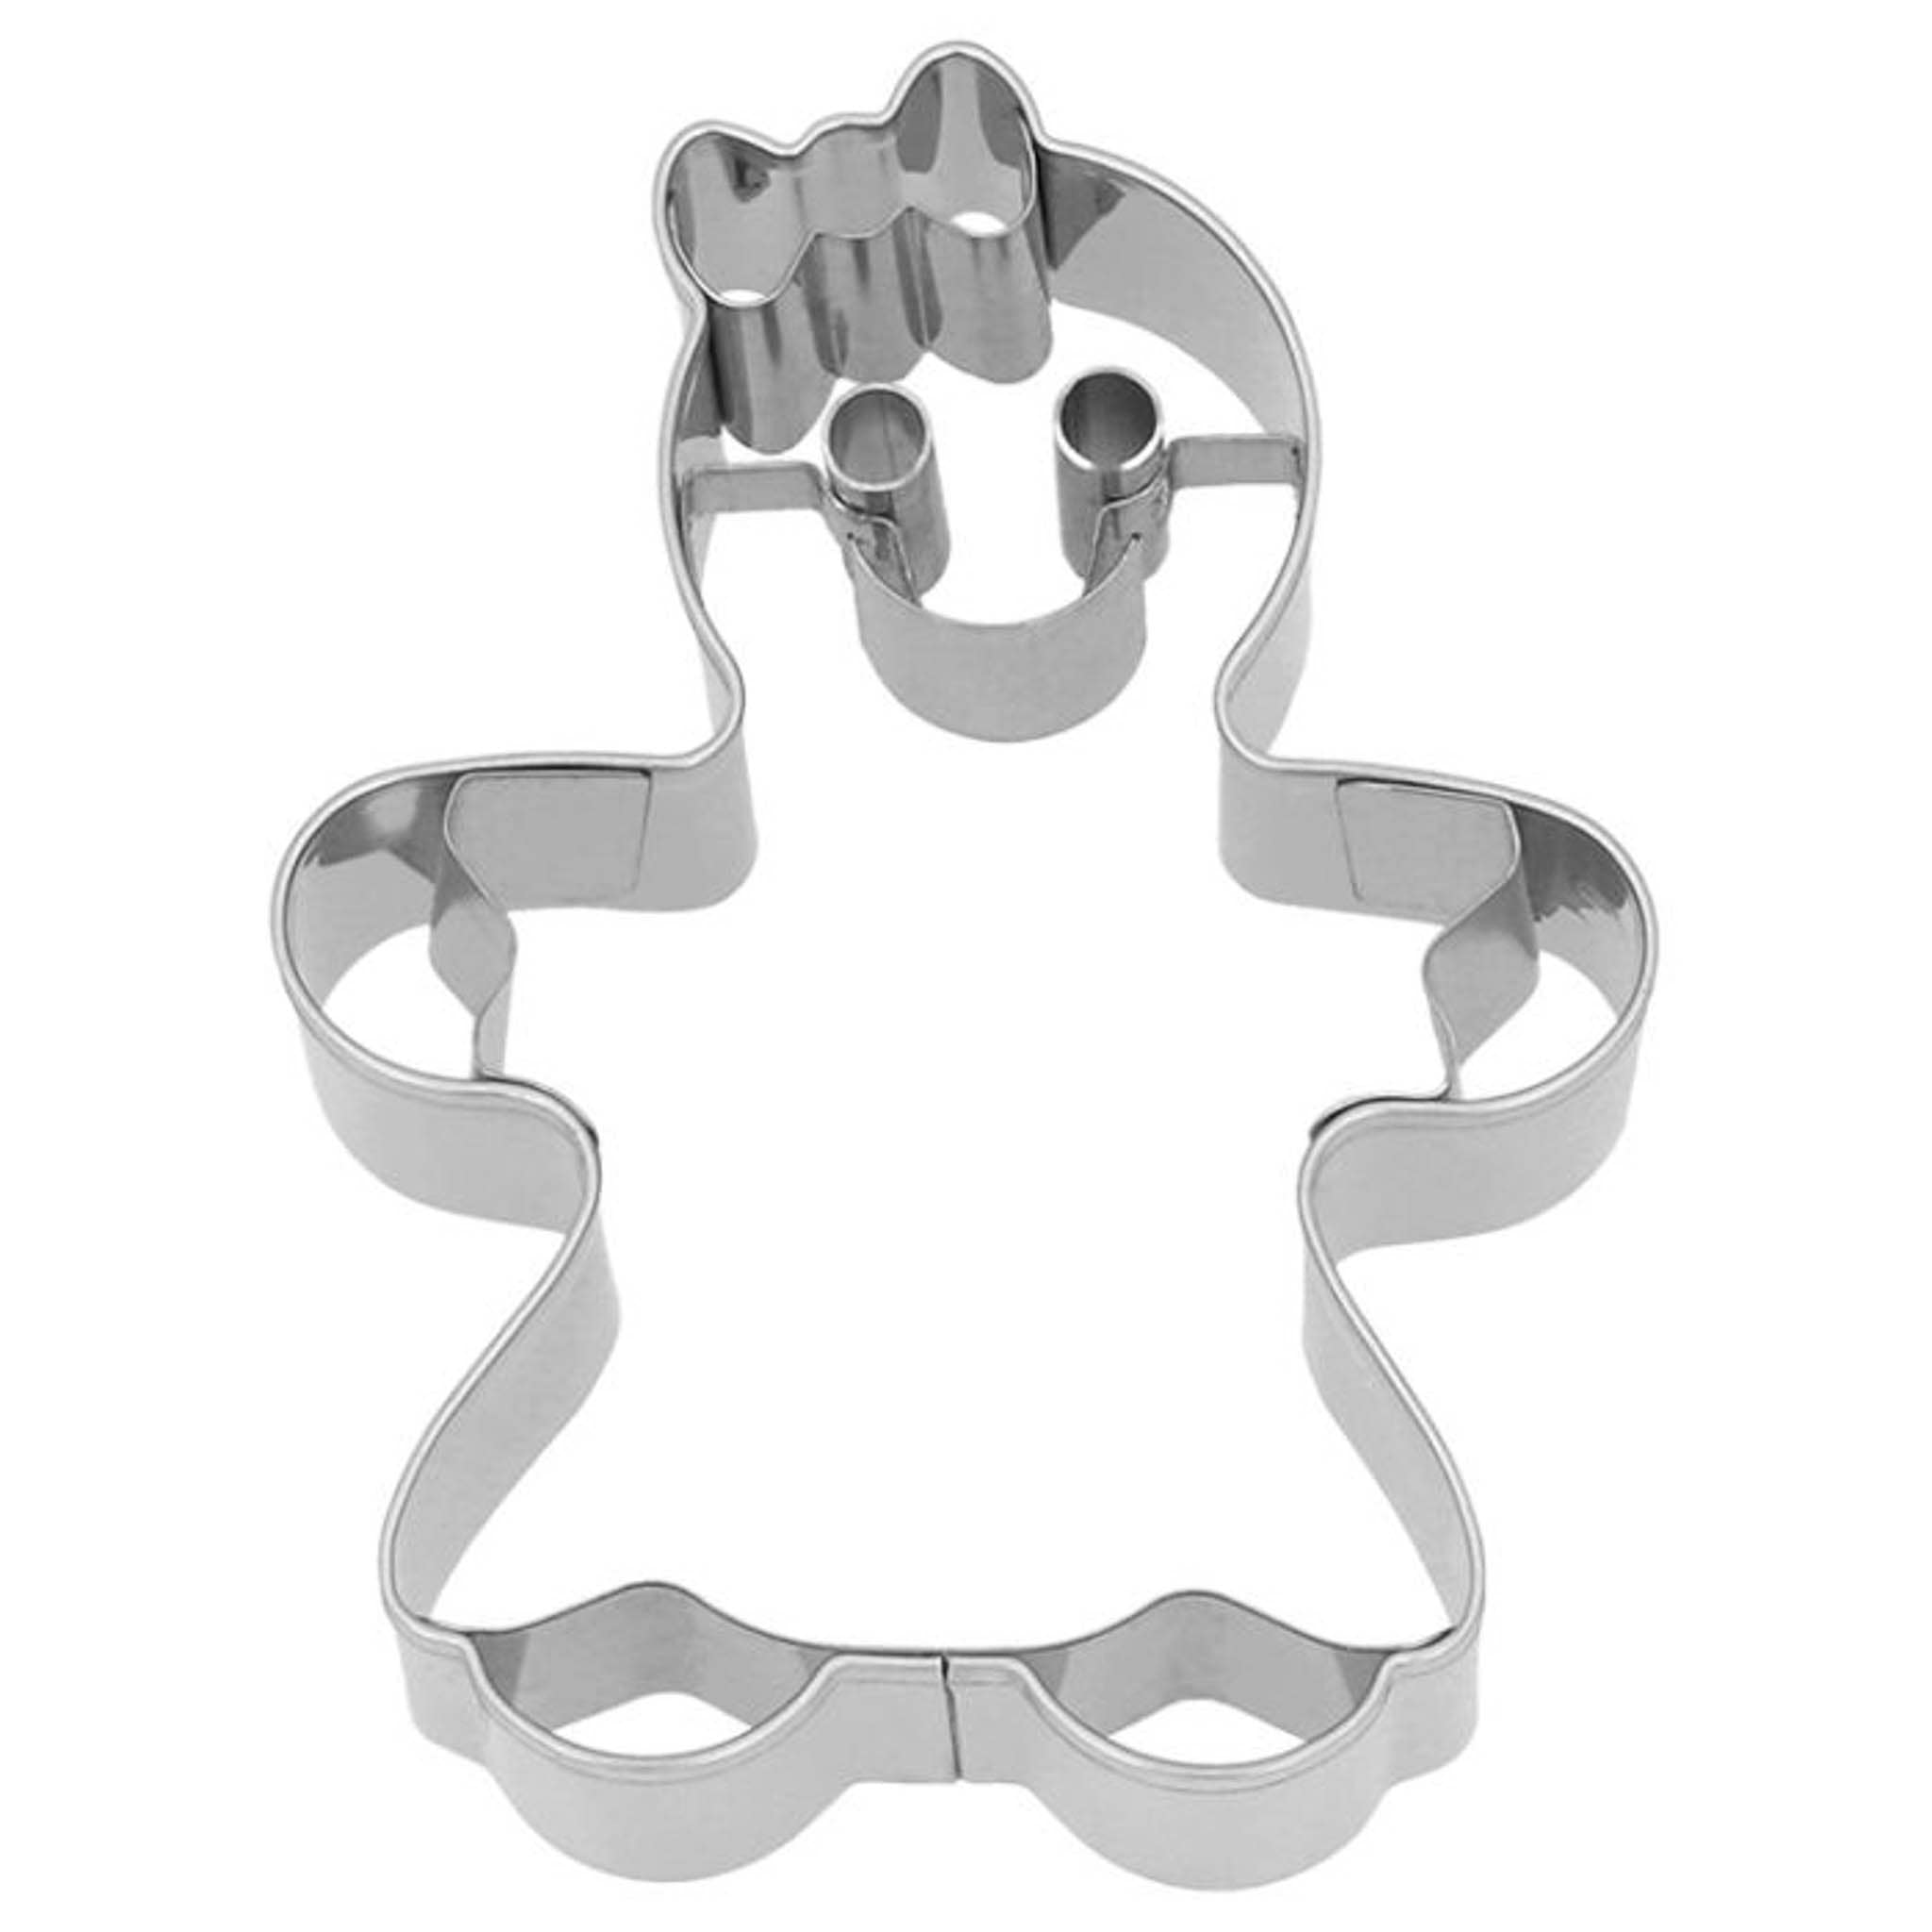 Stainless Steel Gingerbread Woman Cookie Cutter, 8cm